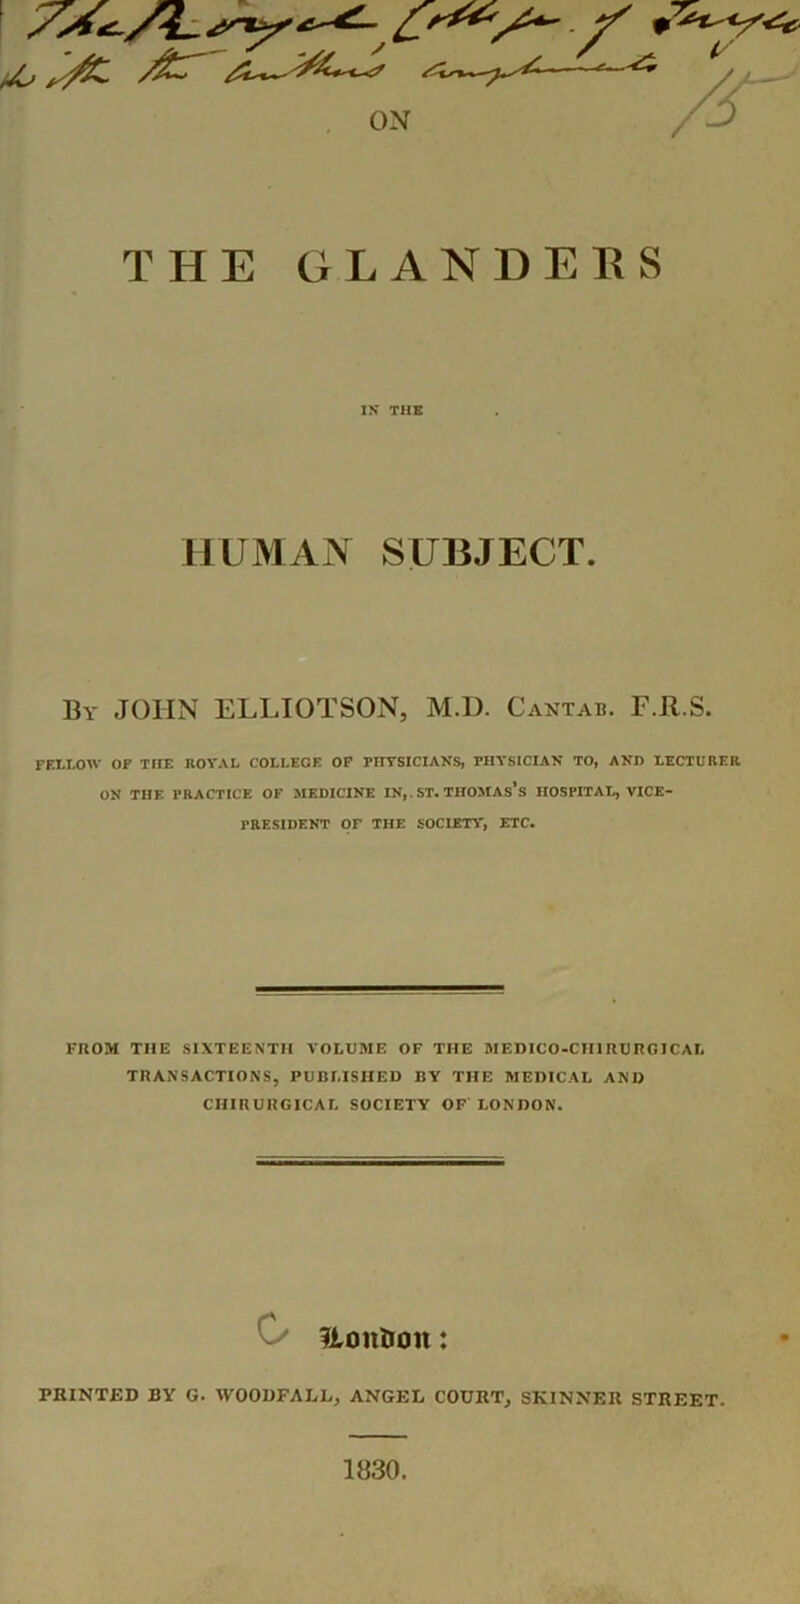 THE GLANDERS IK THE HUMAN SUBJECT. By JOHN ELLIOTSON, M.D. Cantab. F.Jl.S. FELLOW OP THE ROVAL COLLEGE OP PHTSICIAKS, PHYSICIAN TO, AND LECTURER ON THE PRACTICE OF .MEDICINE IN,. ST. THOMAs’s HOSPITAL, VICE- PRESIDENT OF THE SOCIETY, ETC. FROM THE SIXTEENTH VOLUME OF THE MEDICO-CHIRURGICAL TRANSACTIONS, PUBLISHED BY THE MEDICAL AND CHIRURGICAL SOCIETY OF LONDON. C/ fiontron: PRINTED BY G. WOOUFALL, ANGEL COURT, SKINNER STREET. 1830.